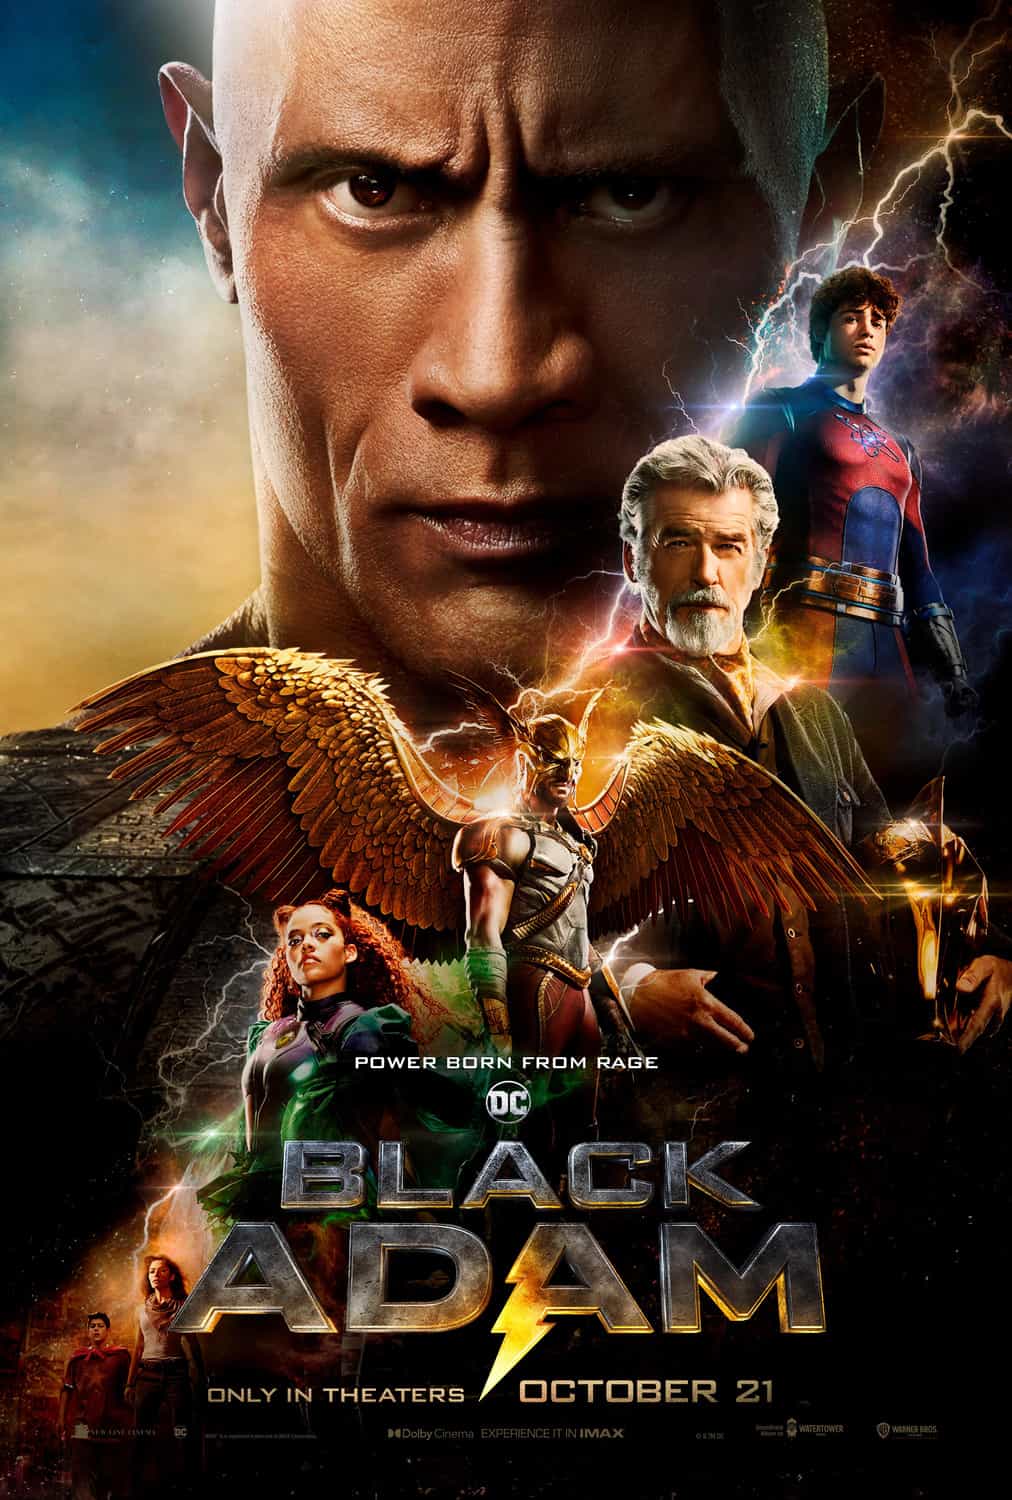 UK Box Office Weekend Report 4th - 6th November 2022: Black Adam makes it three weeks at the top of the UK box office while Living is the top new movie at 4